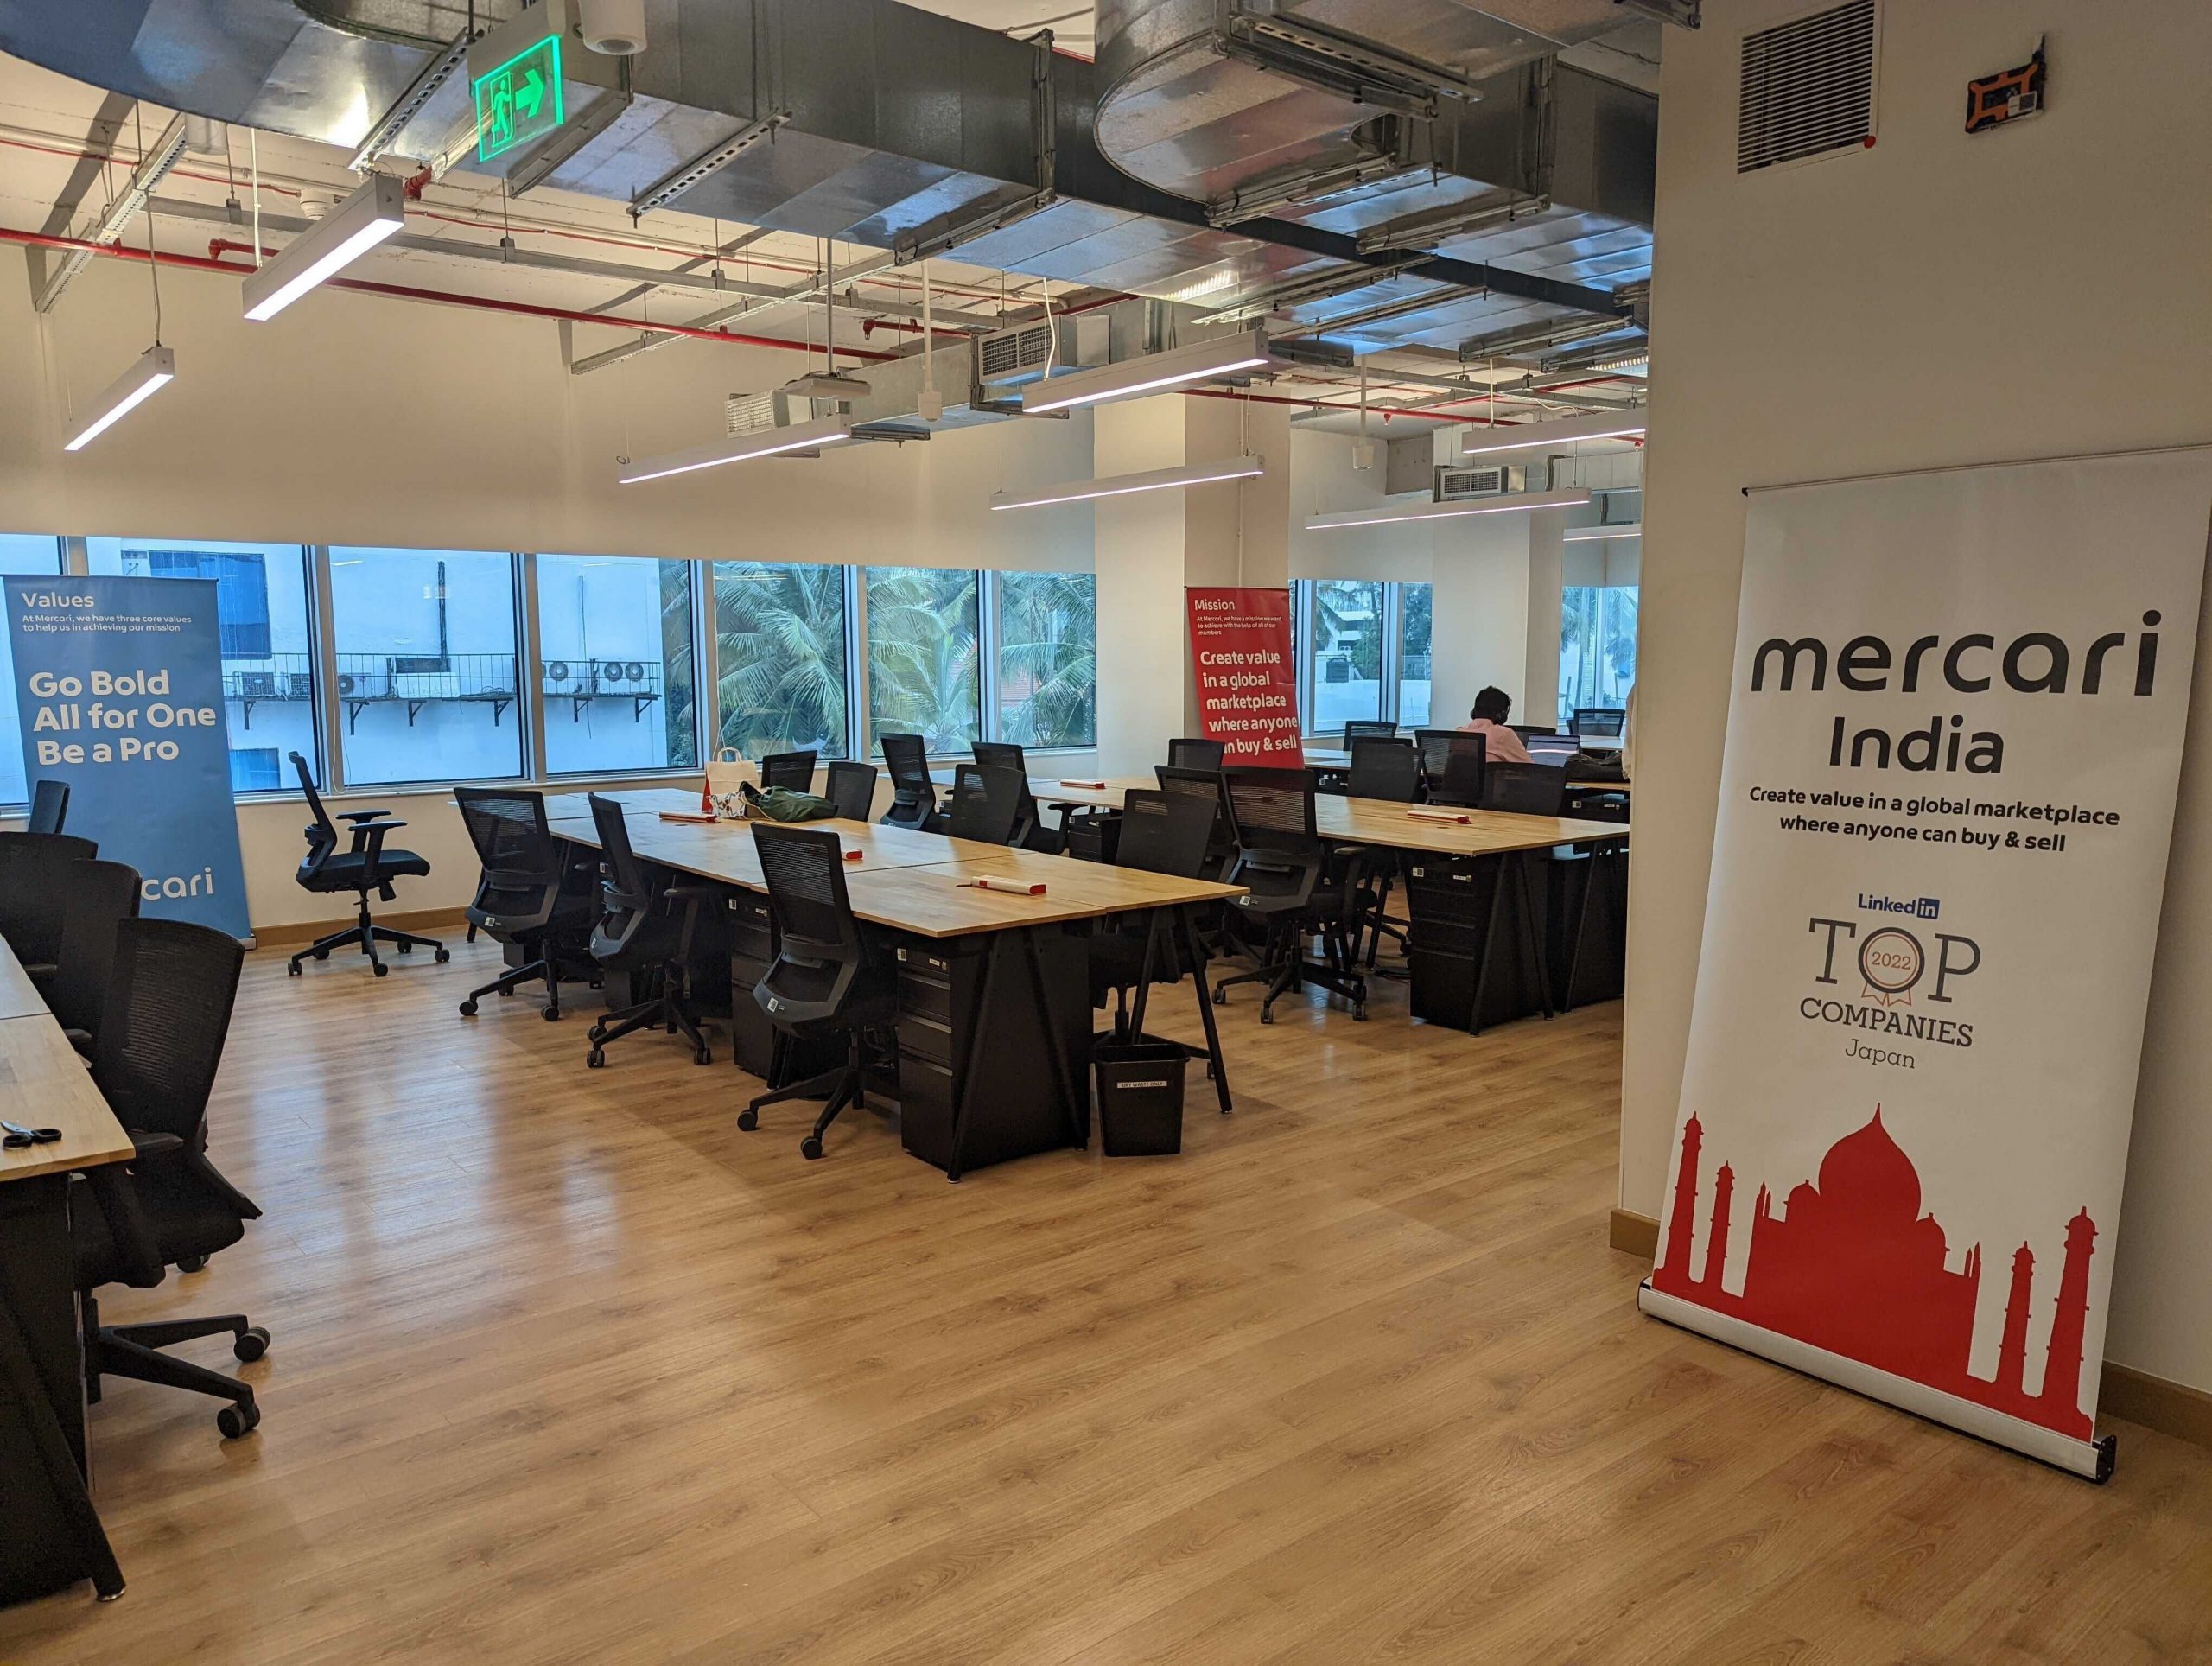 Mercari India : The story of Mercari Group’s first ever Global Center of Excellence